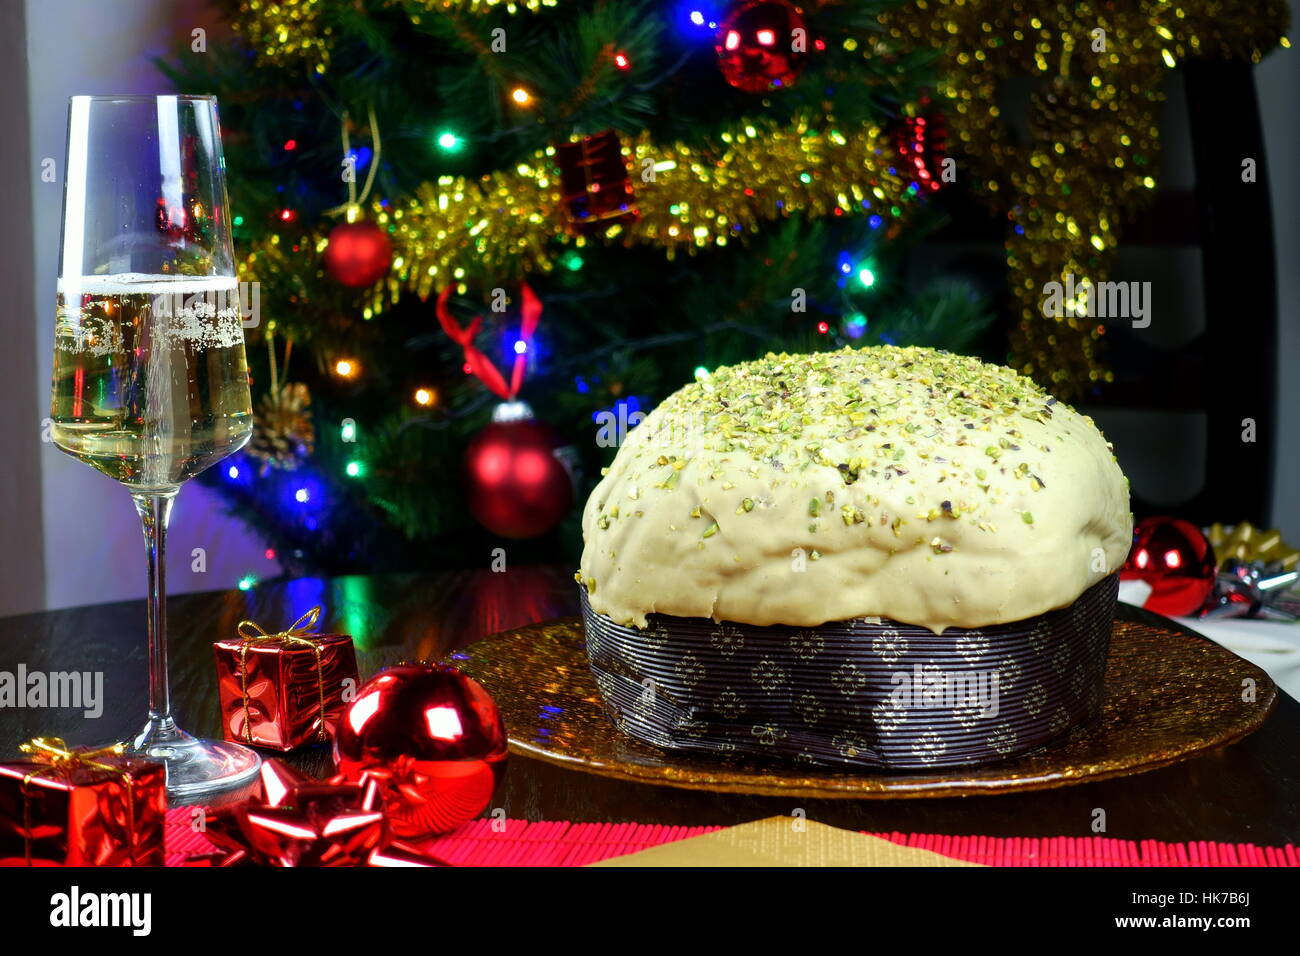 Pistachio panettone, warm hygge atmosphere - Typical Italian Christmas cake with glass of sparkling prosecco and Christmas tree in background Stock Photo